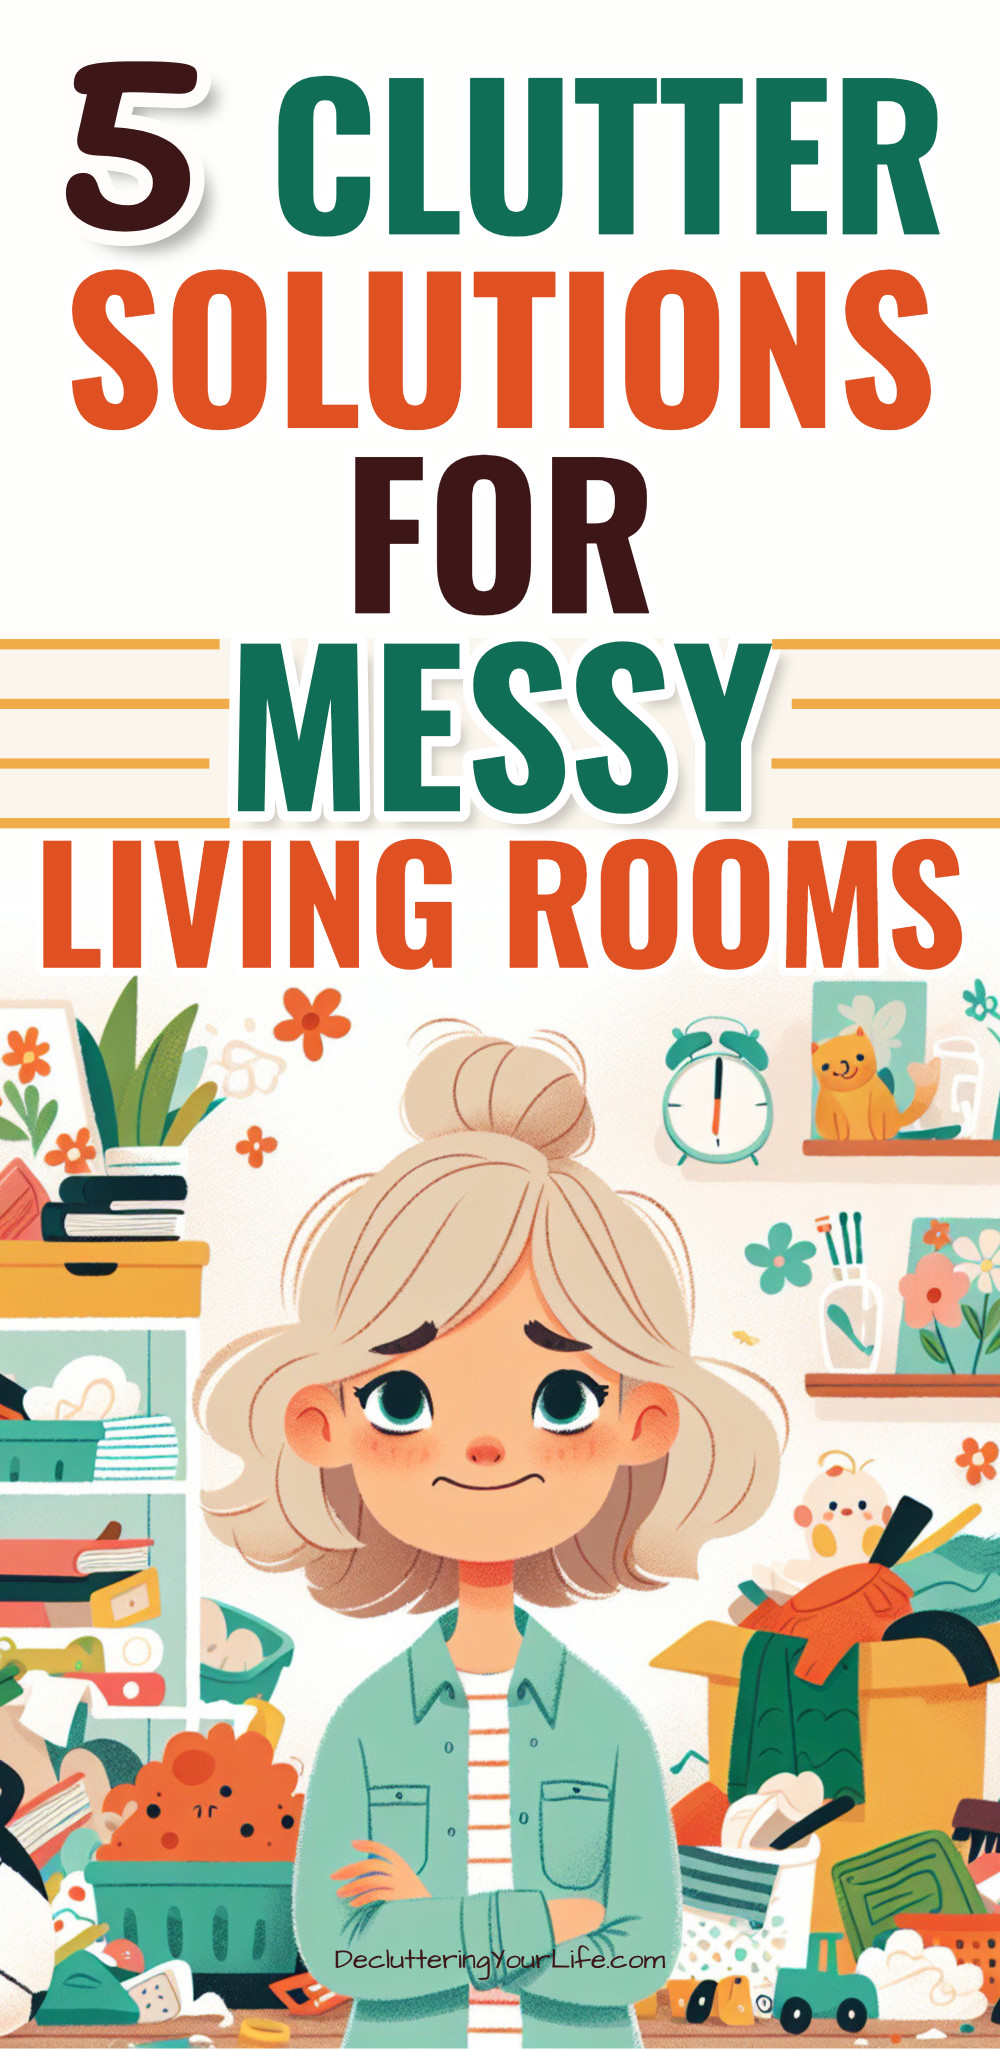 5 clutter solutions for messy living rooms